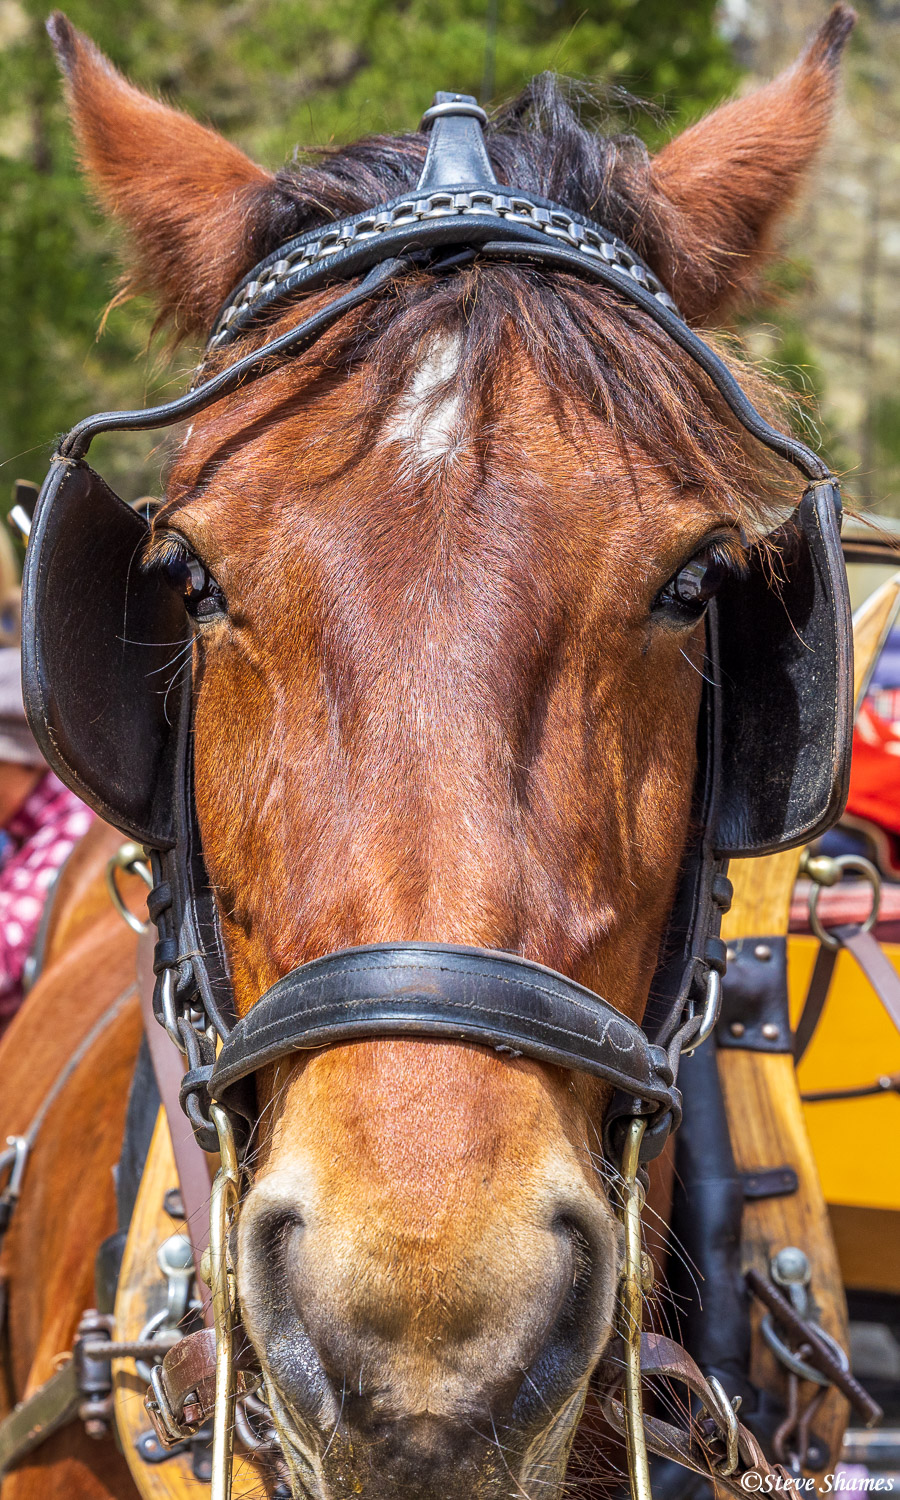 A horse portrait, from the Roseg Valley horse drawn carriage.